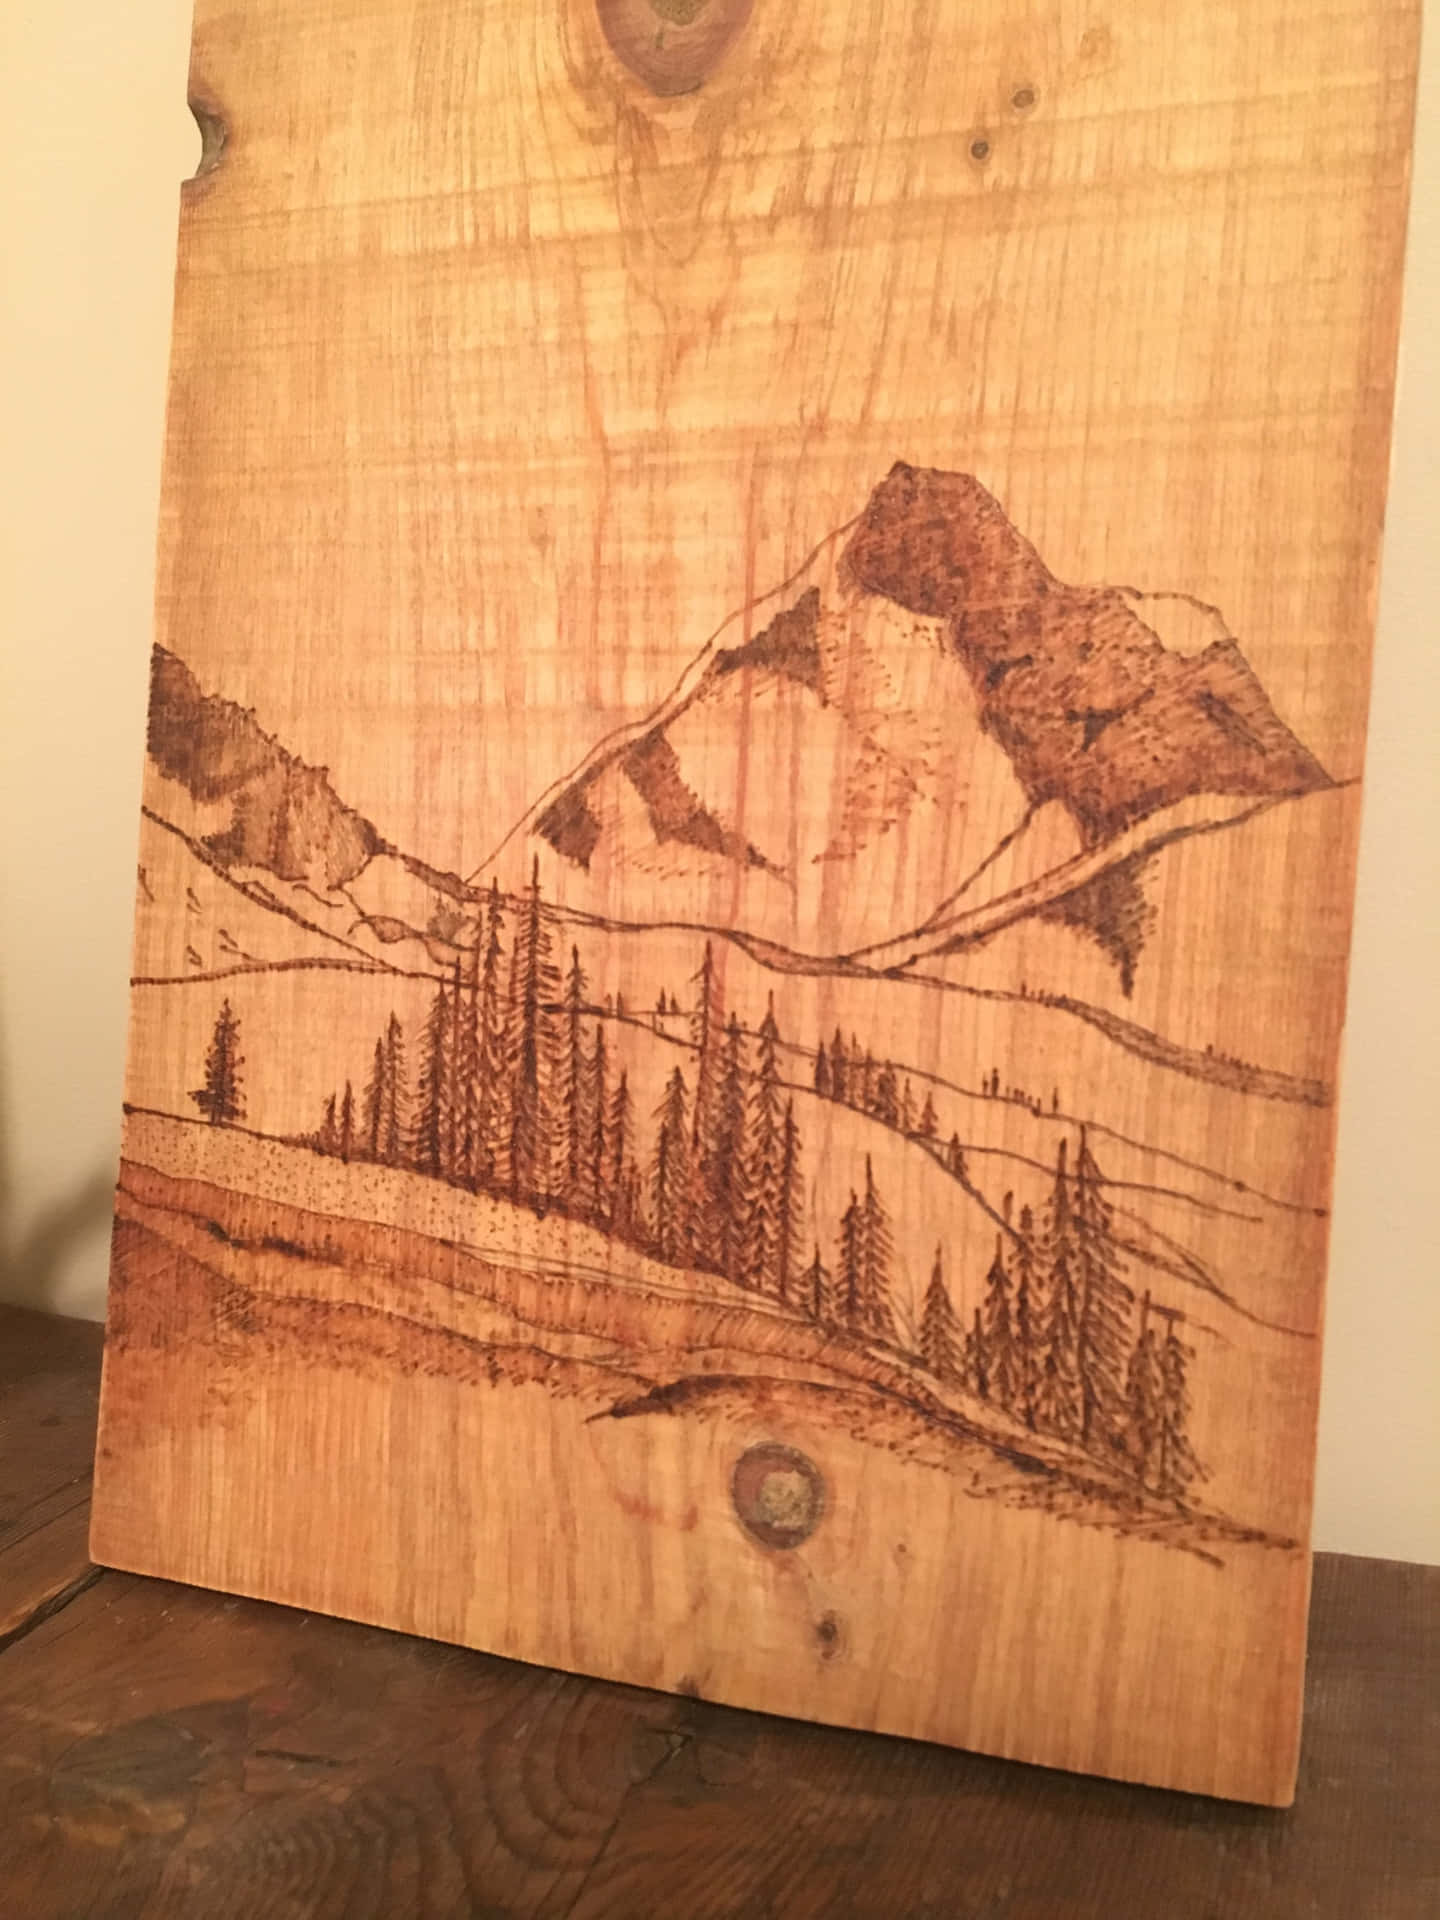 A Wood Carving Of A Mountain Scene